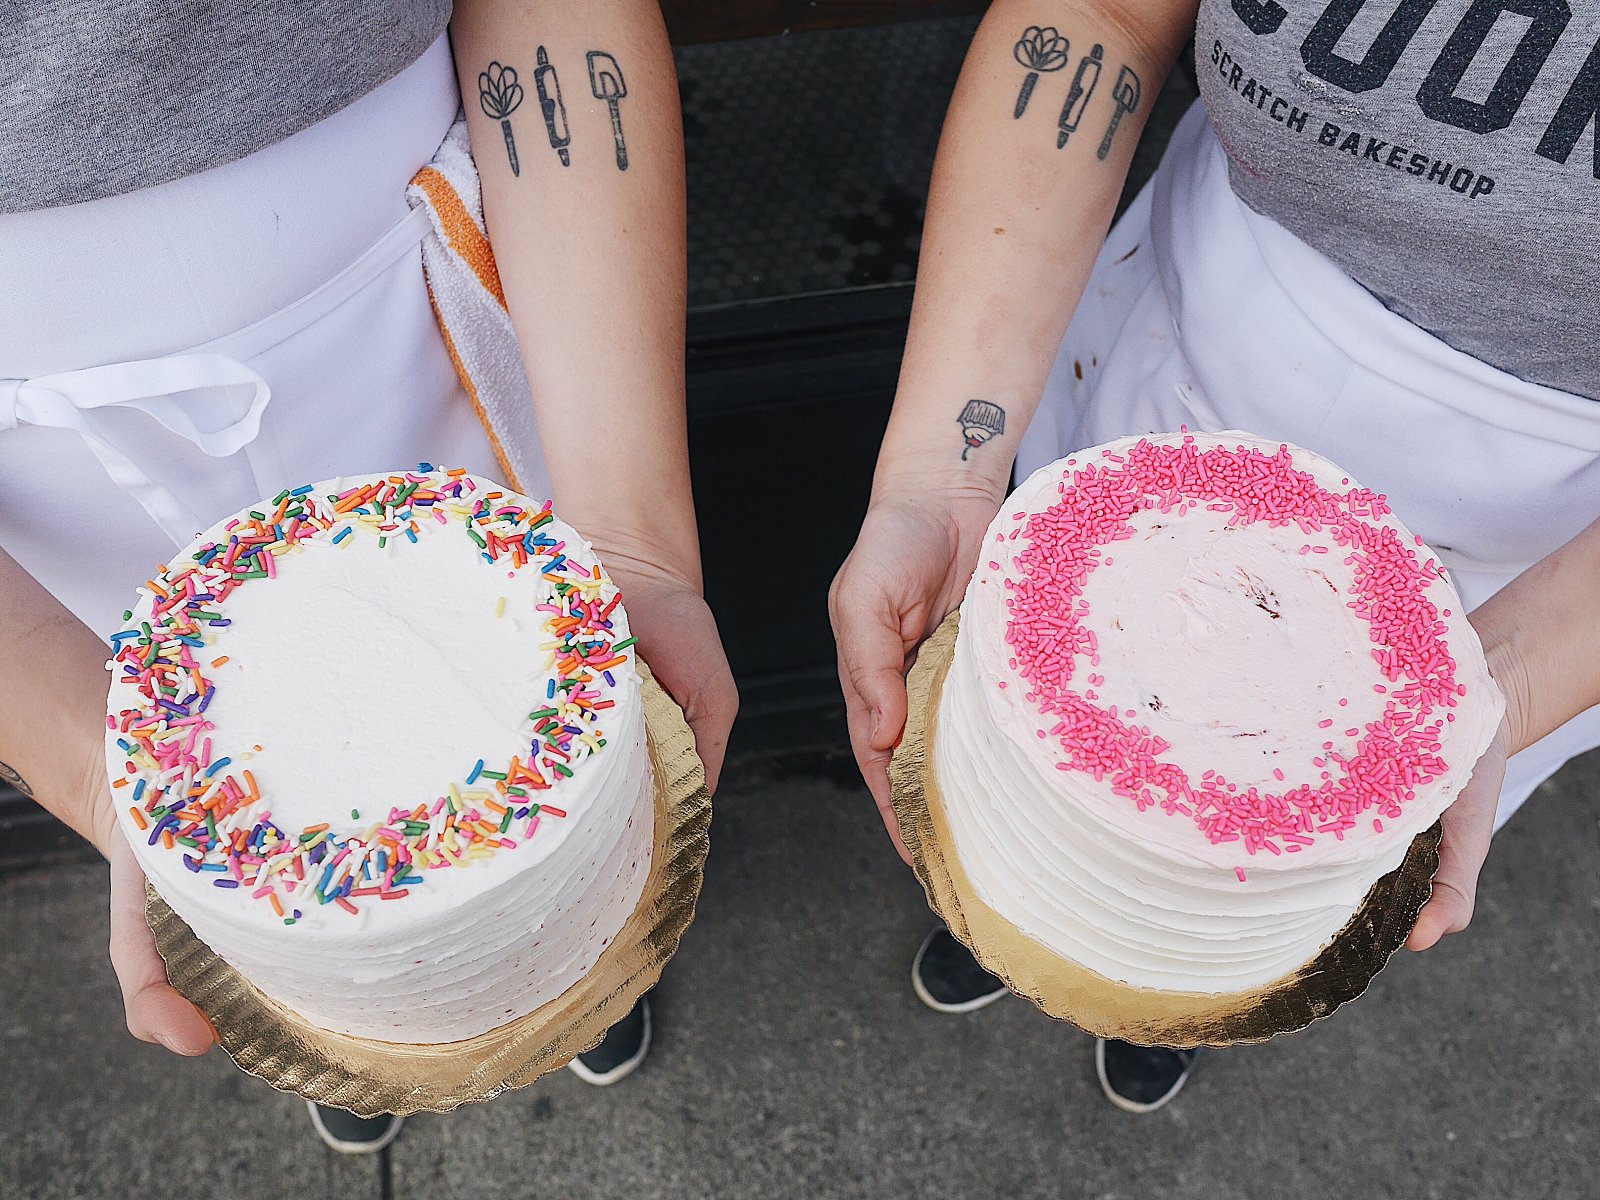 Photo of two people holding frosted cakes. One is white with rainbow sprinkles and the other is white with pink sprinkles